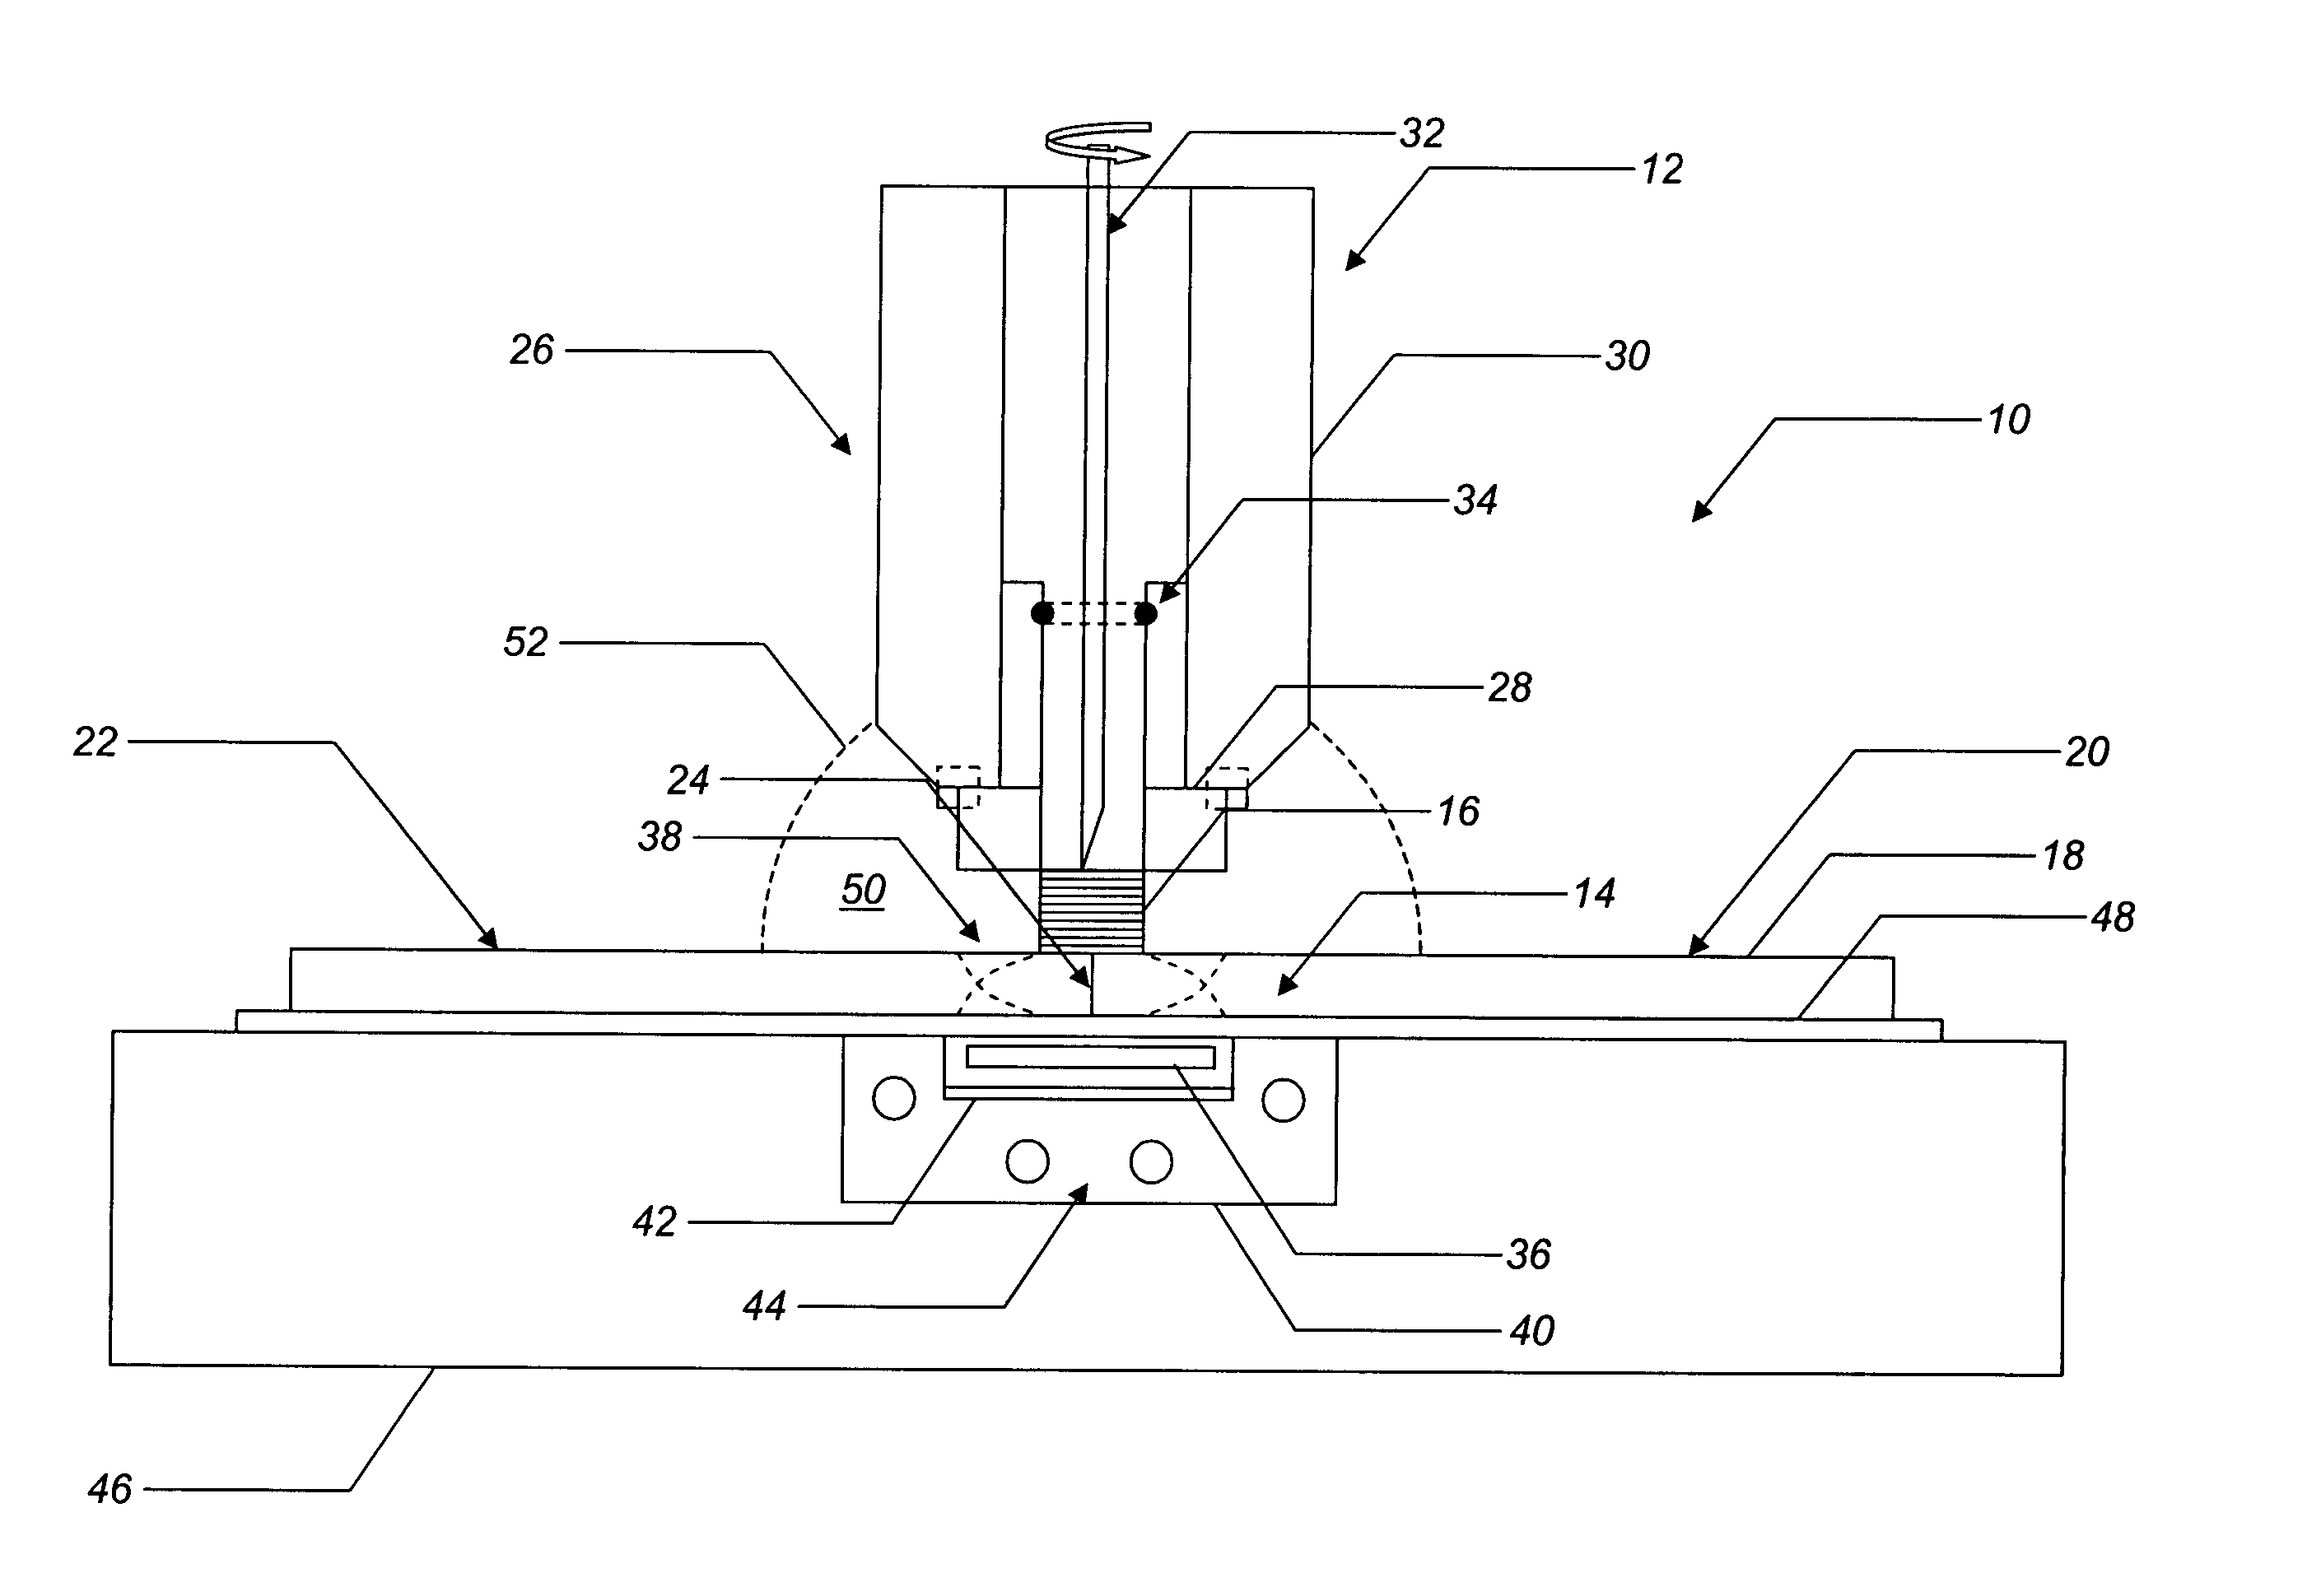 Friction stir welding apparatus and associated thermal management systems and methods